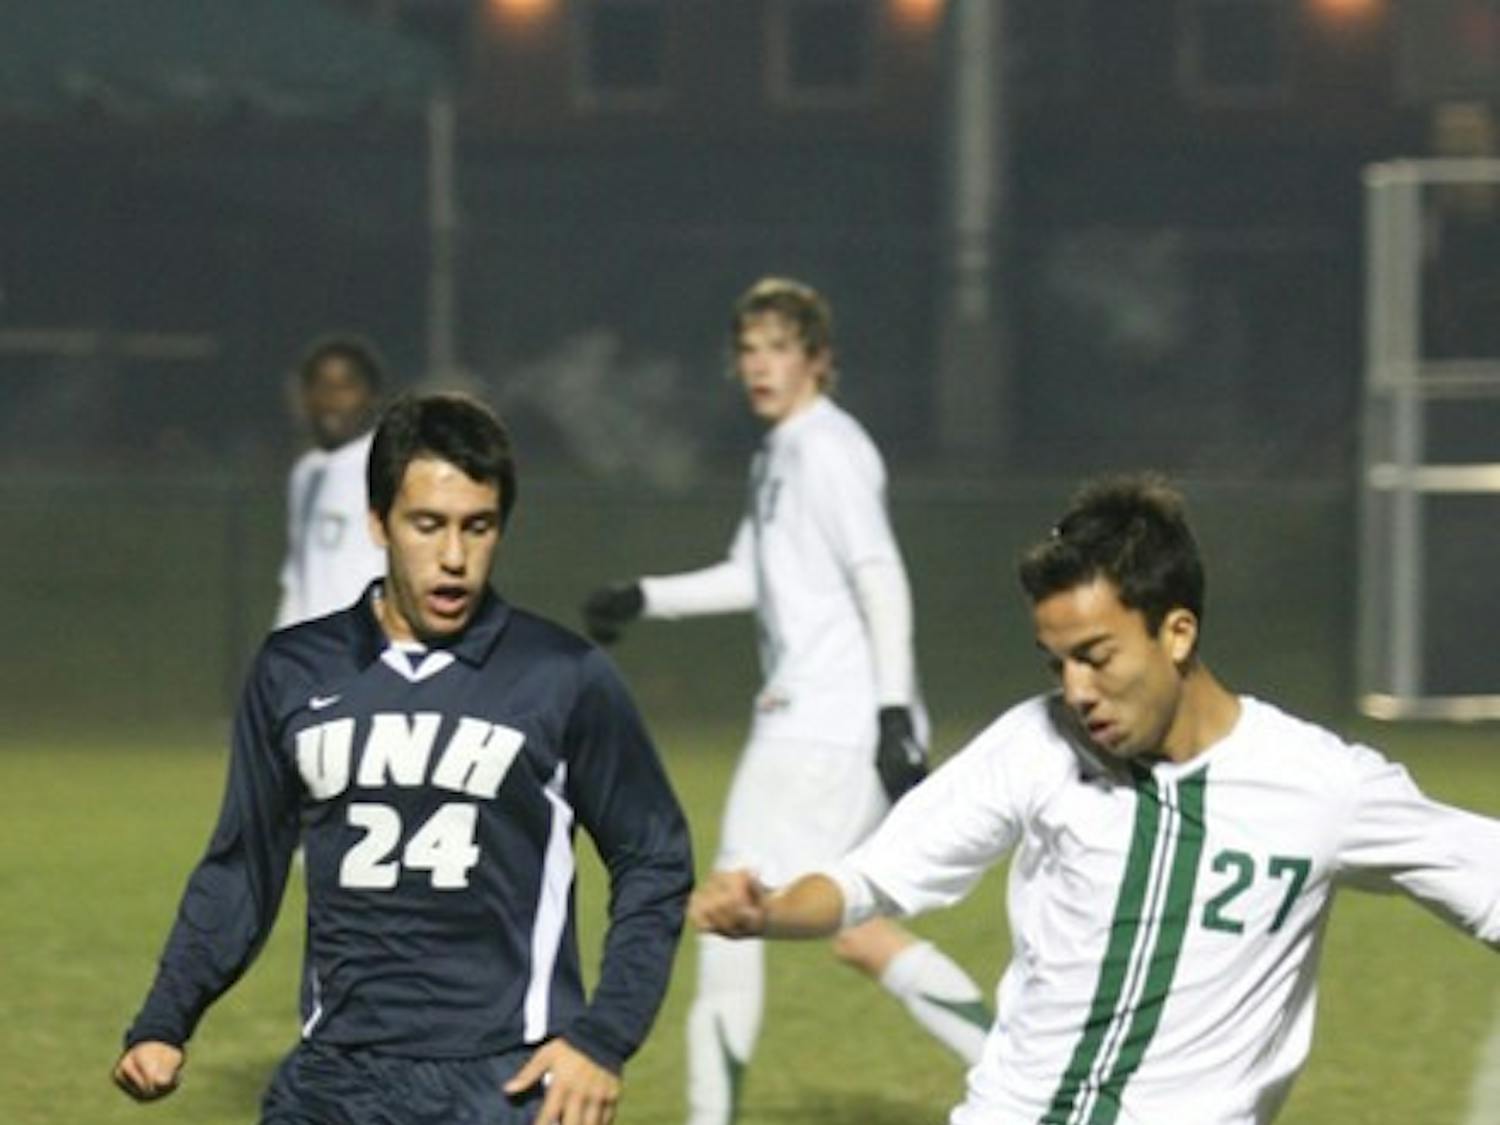 Andrew Olsen '11 notched the game-winning goal eight minutes into overtime as the Big Green outlasted UNH, 2-1.